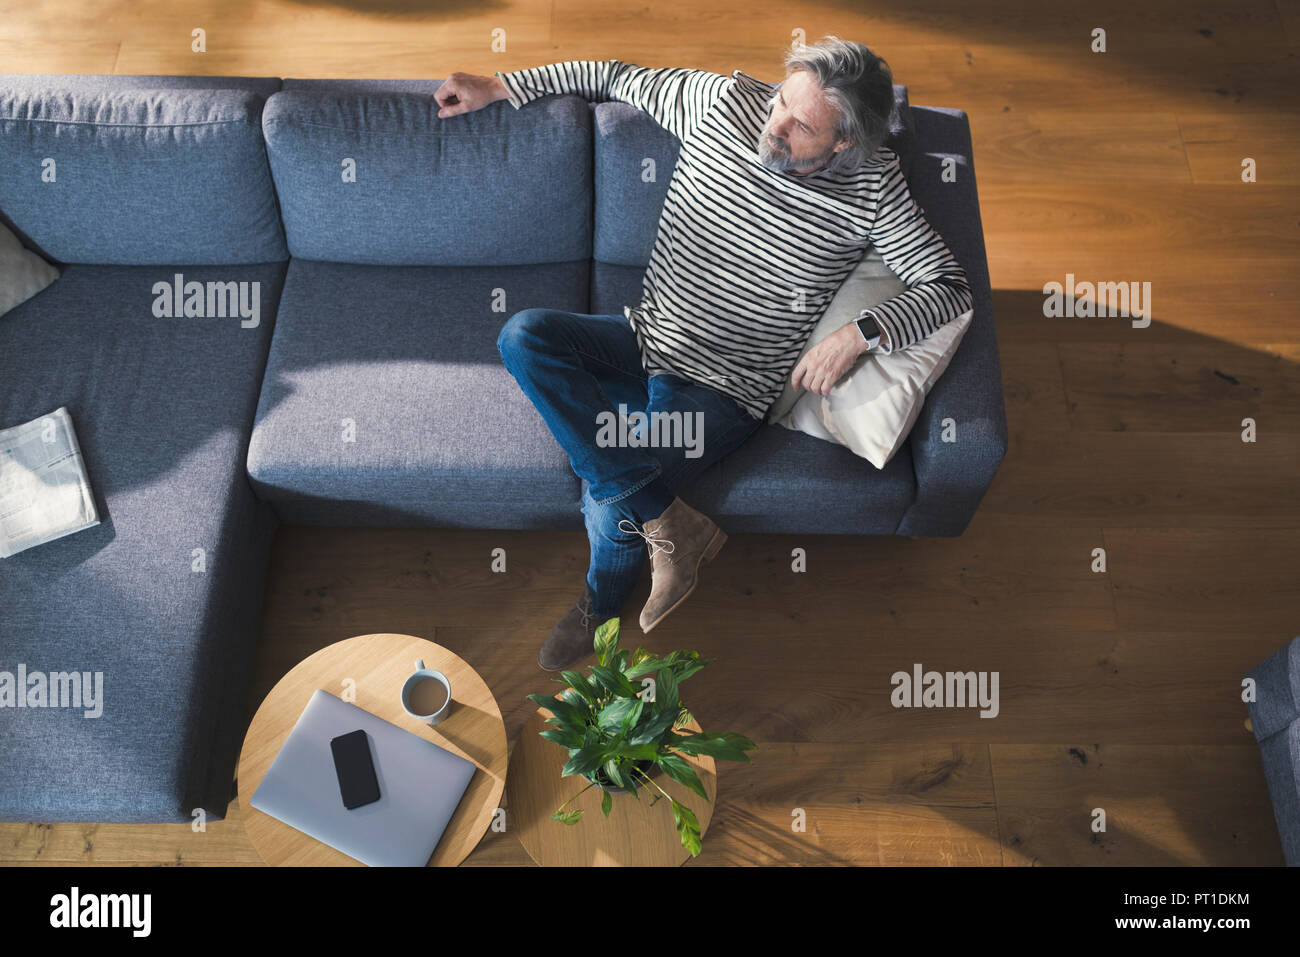 Senior man sitting on couch, relaxing and thinking Stock Photo